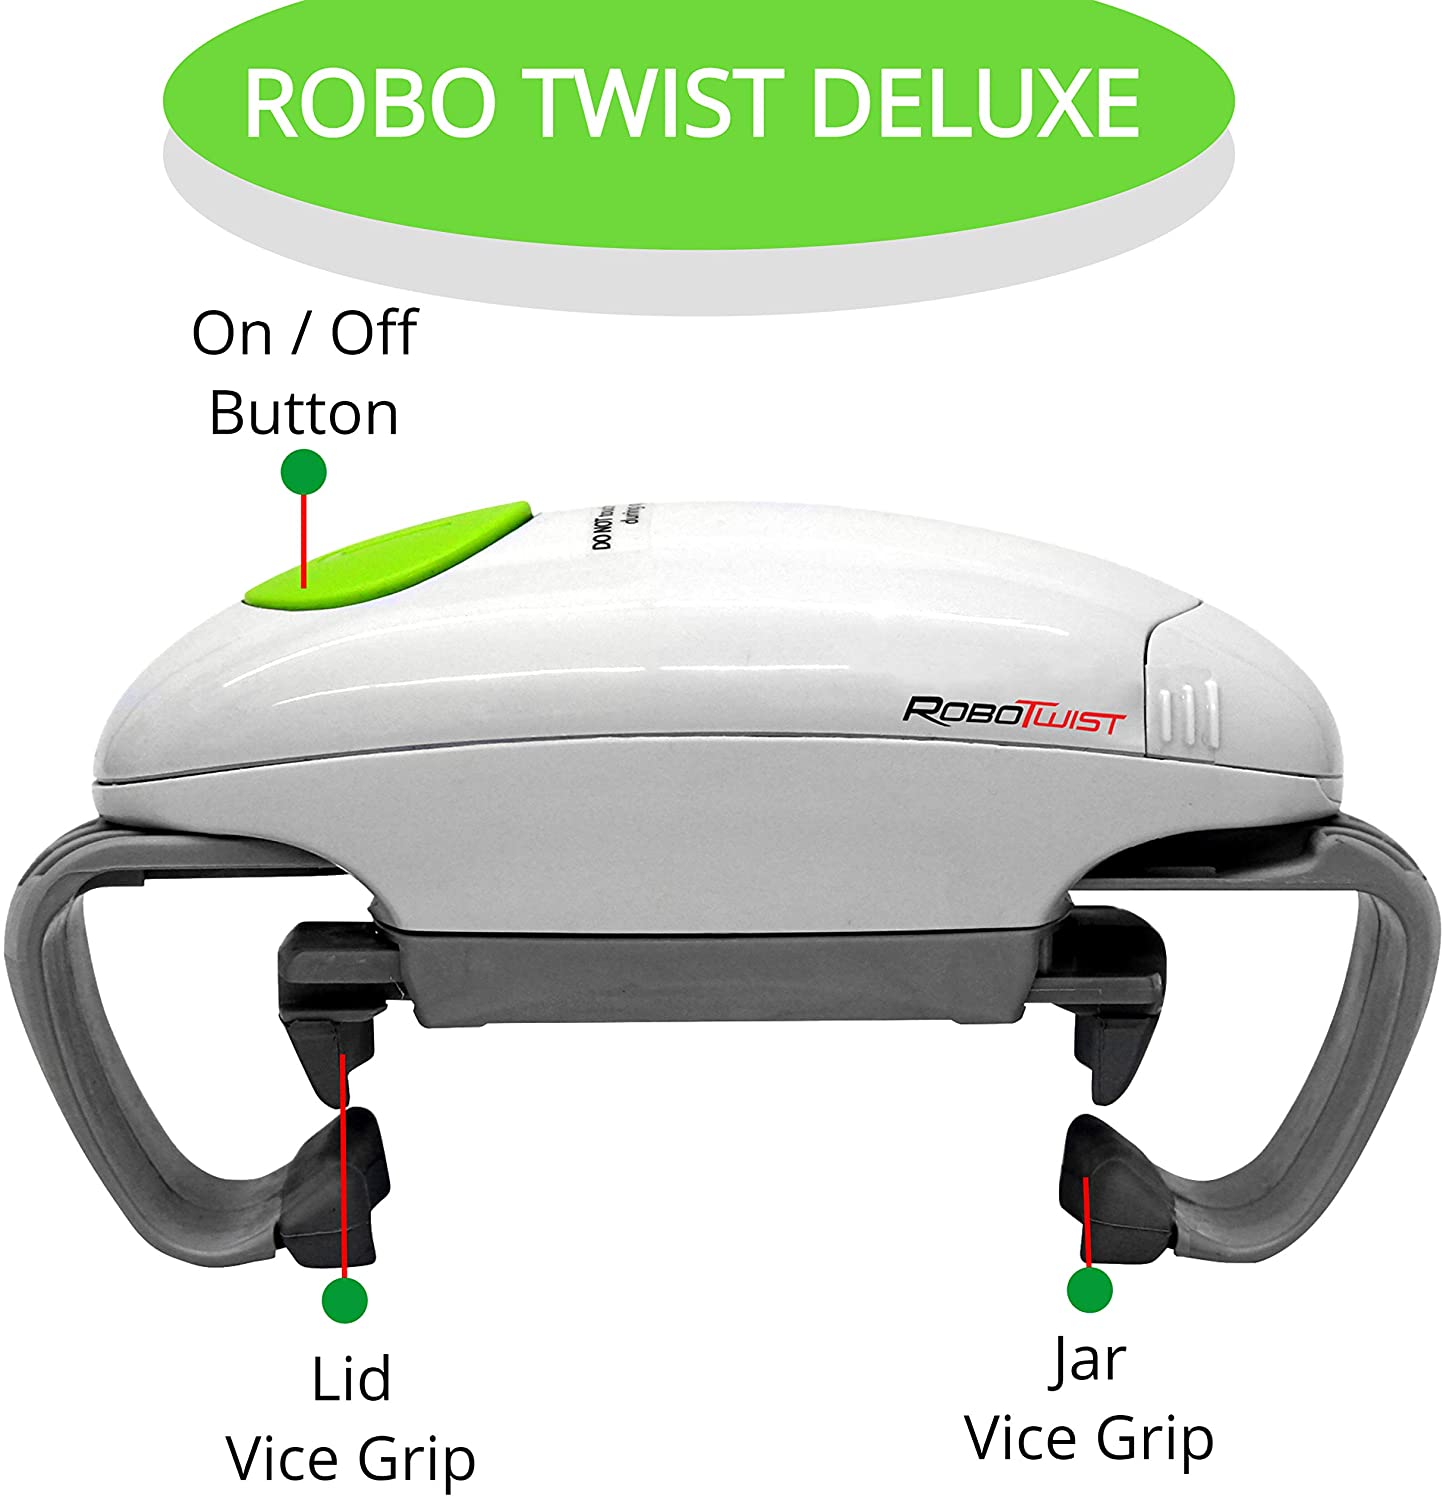 https://www.wideopencountry.com/wp-content/uploads/sites/4/eats/2021/07/Robotwist-Deluxe-7321-Automatic-Jar-Opener-As-Seen-Higher-Torque-for-Improved-Jar-Opening-Performance-On-TV.jpg?resize=1443%2C1500